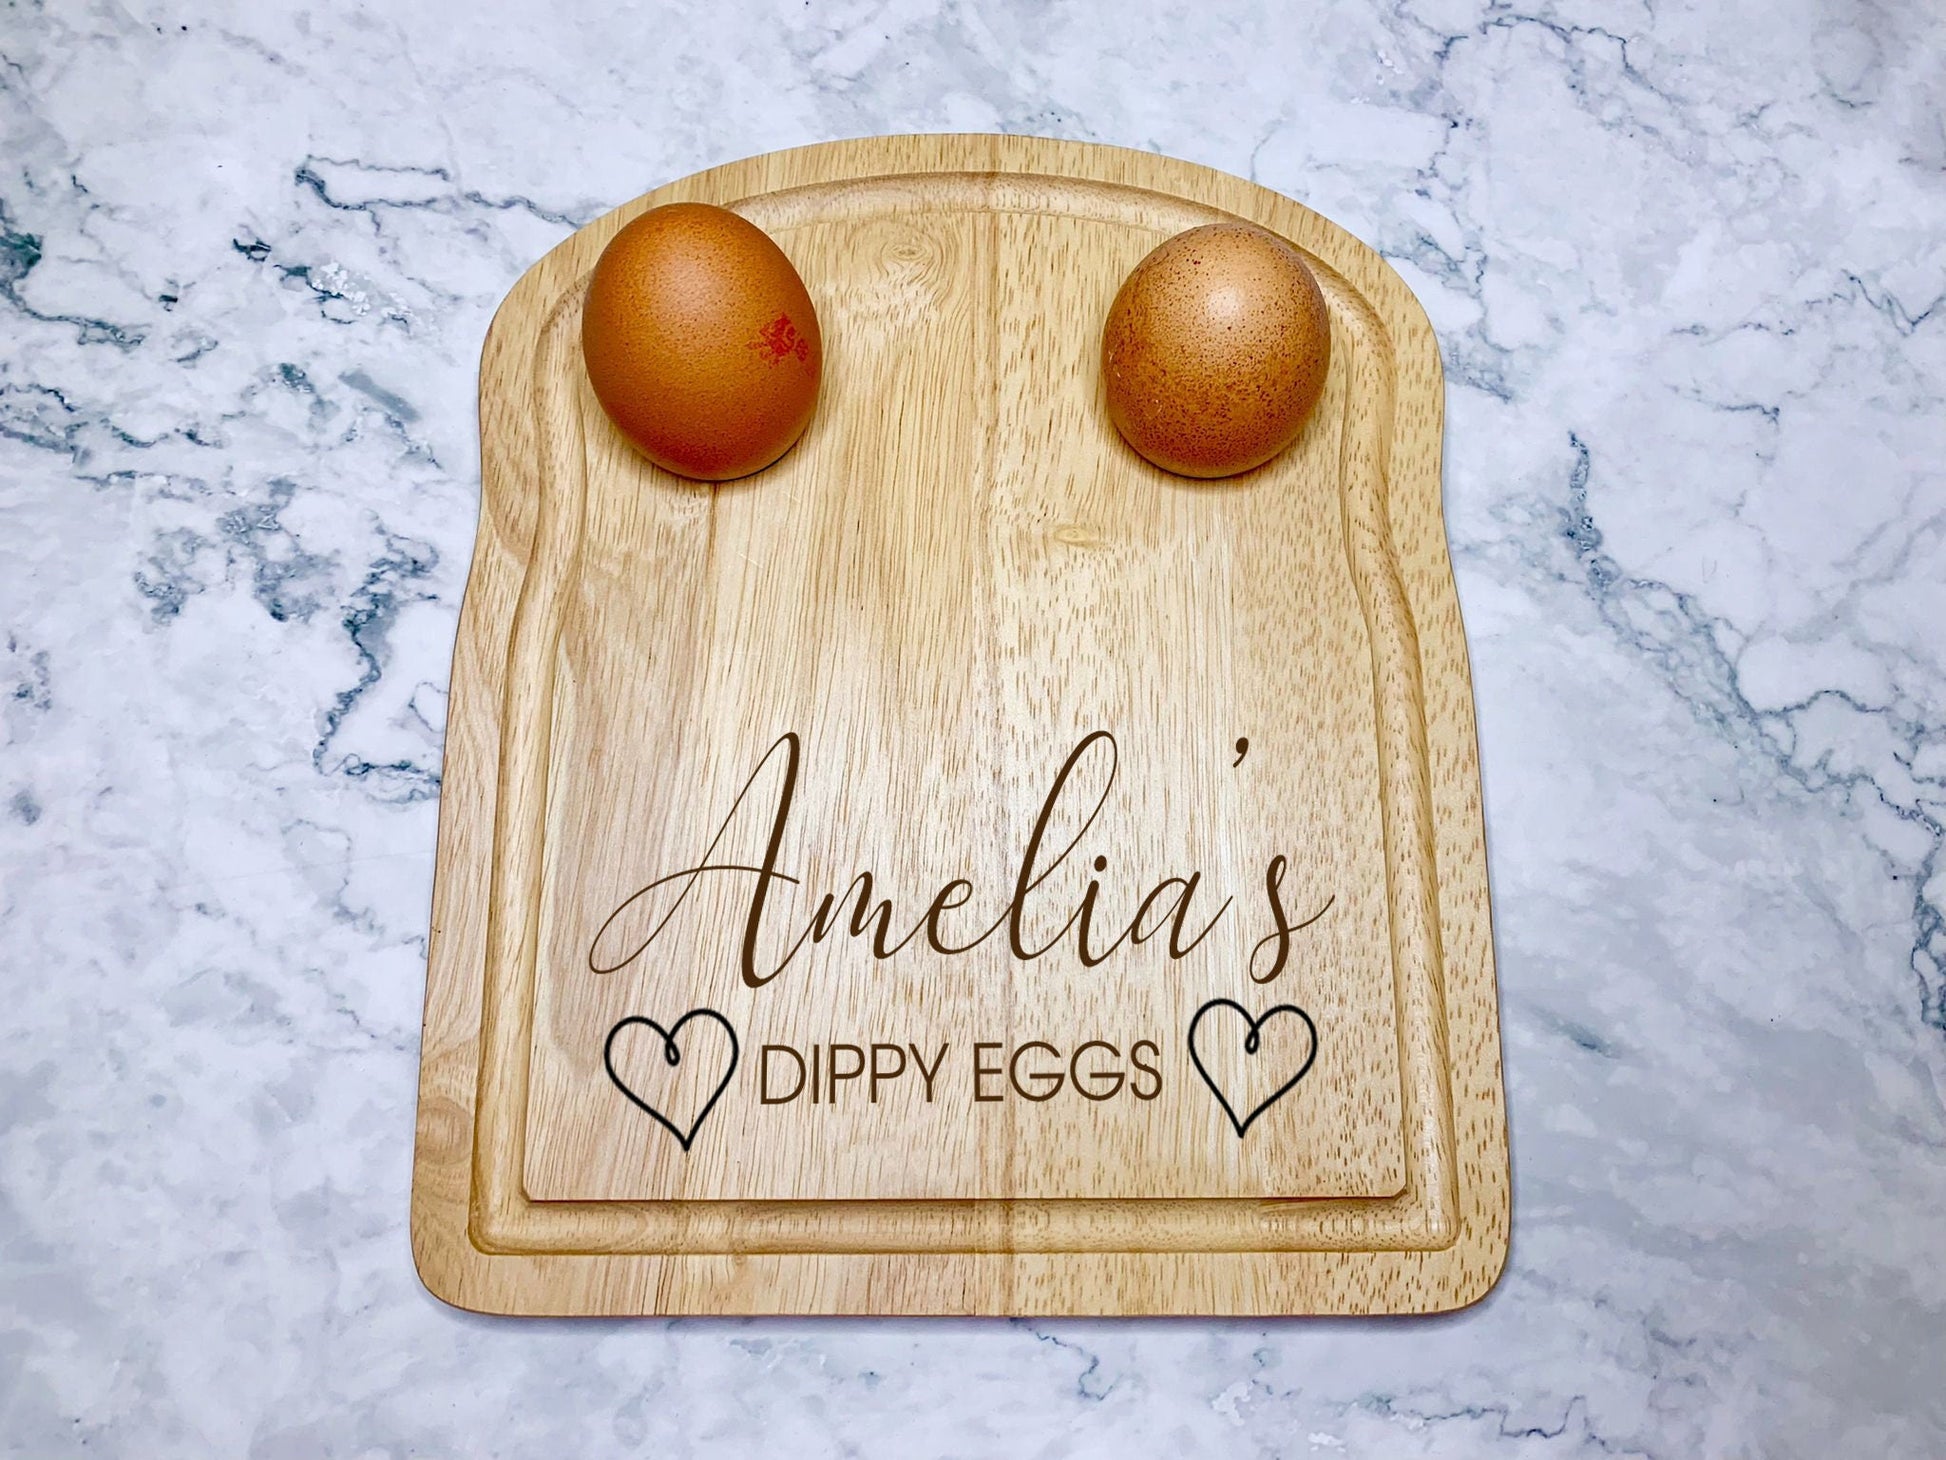 Personalised Dippy Eggs Engraved Wooden Egg and Toast Breakfast Board - Resplendent Aurora